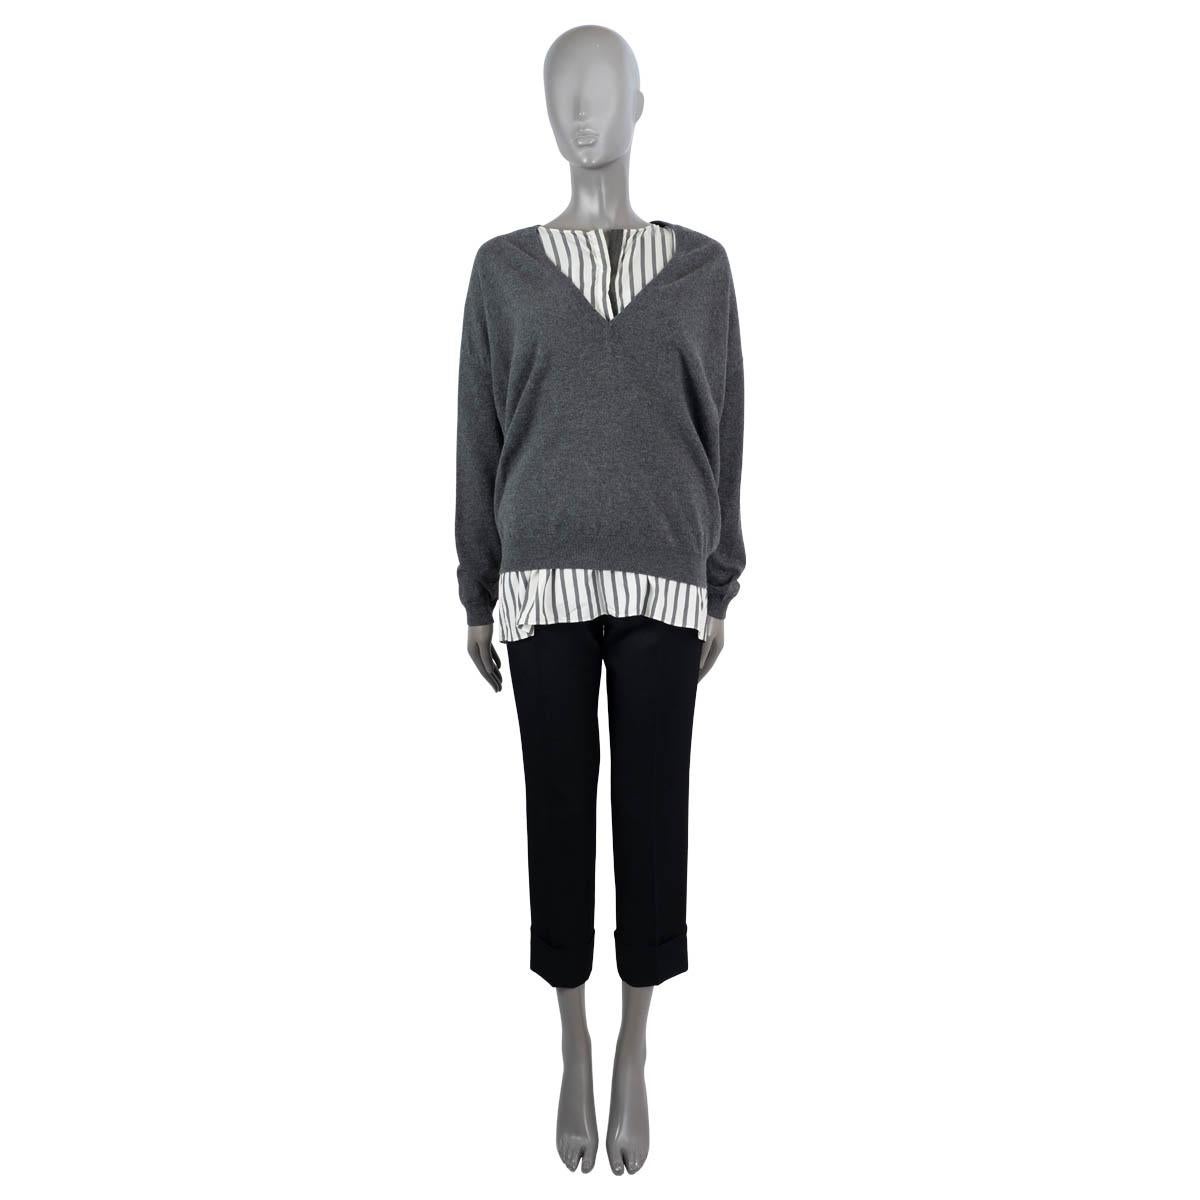 100% authentic Brunello Cucinelli twinset consisting of a sweater in grey cashmere (100%) and a sleeveless blouse grey and ivory striped silk (100%). Features a V-neck on the sweater and crewneck with Monili trim on the top. Both pieces can be